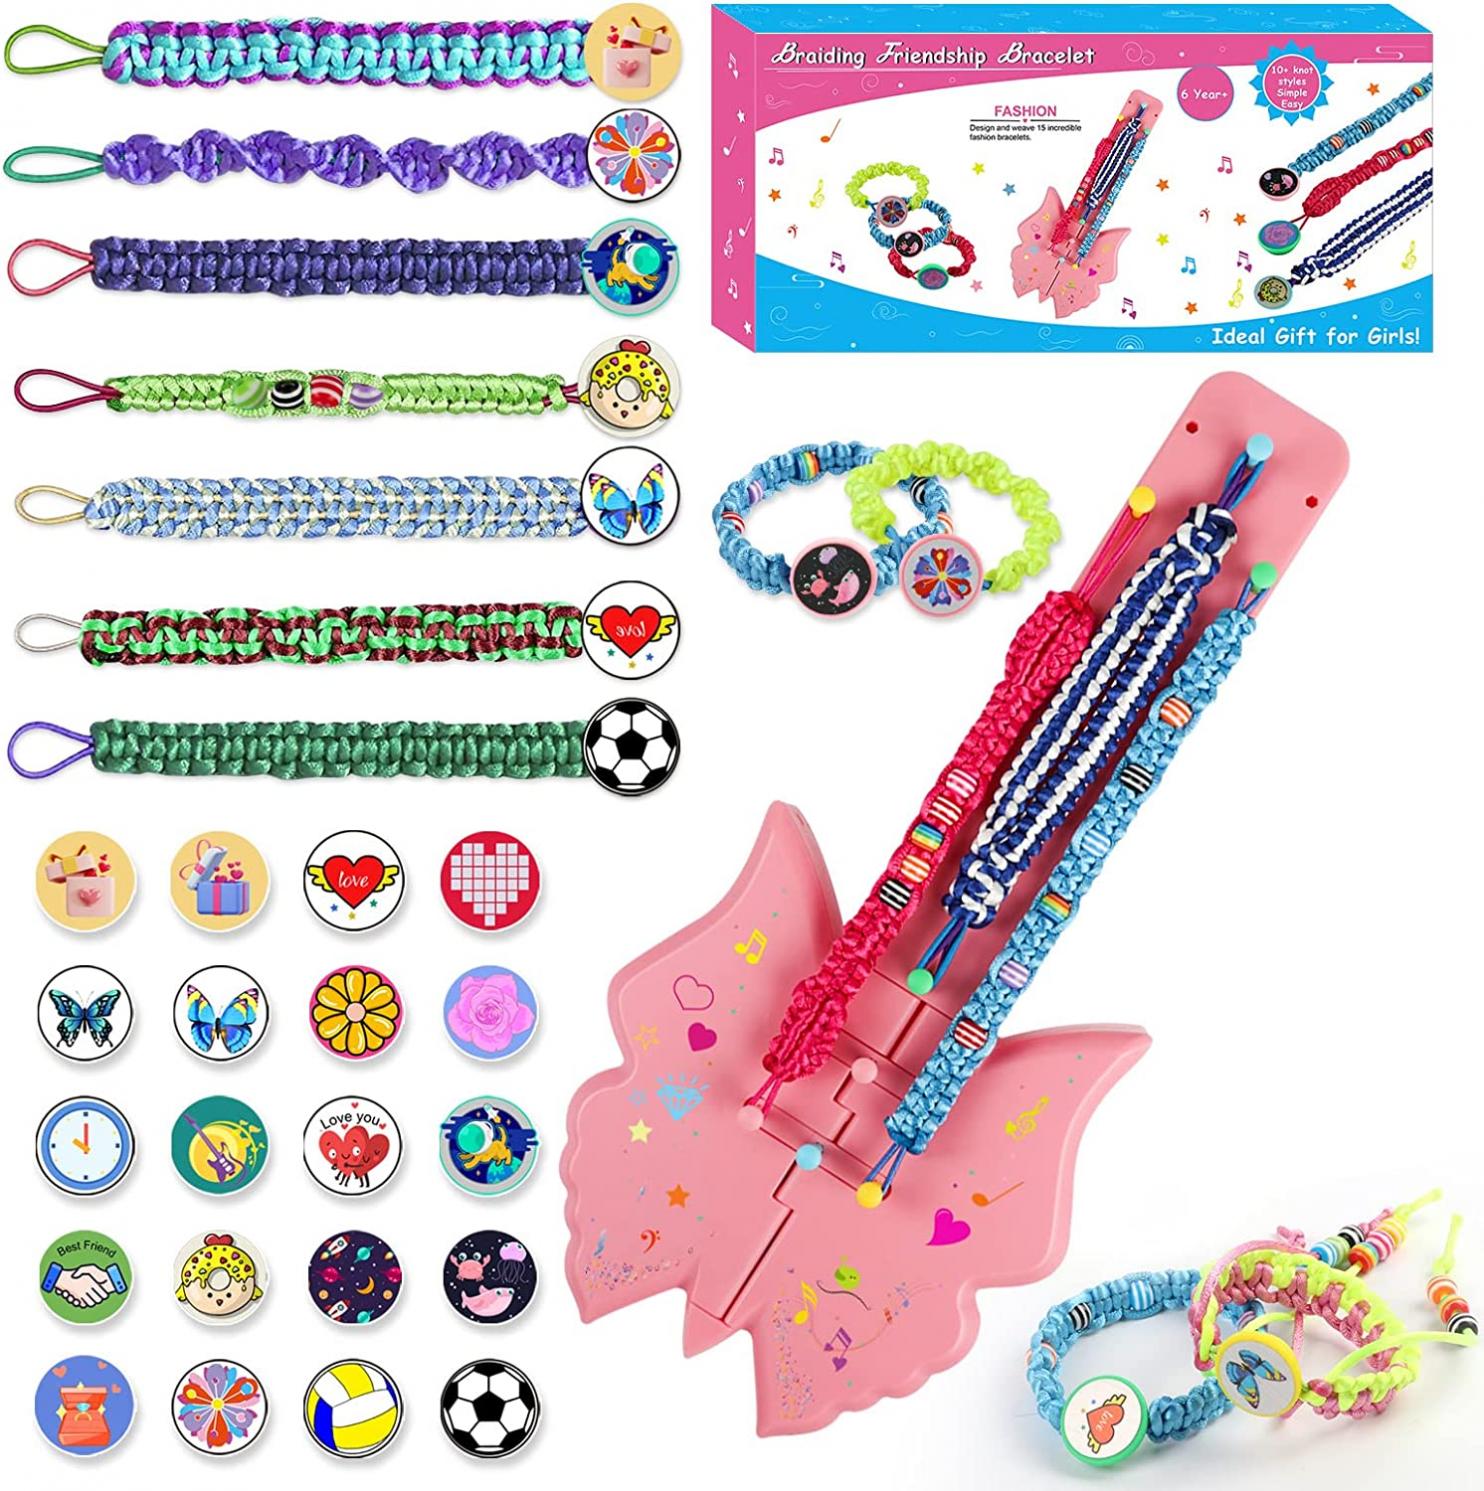 Friendship Bracelet Making Kit for Girls, Best Birthday Christmas Gifts DIY Craft Kits Toys for Girl Age 6 7 8 9 10 11 12 Year Old, Popular Kids Jewelry Making Kit